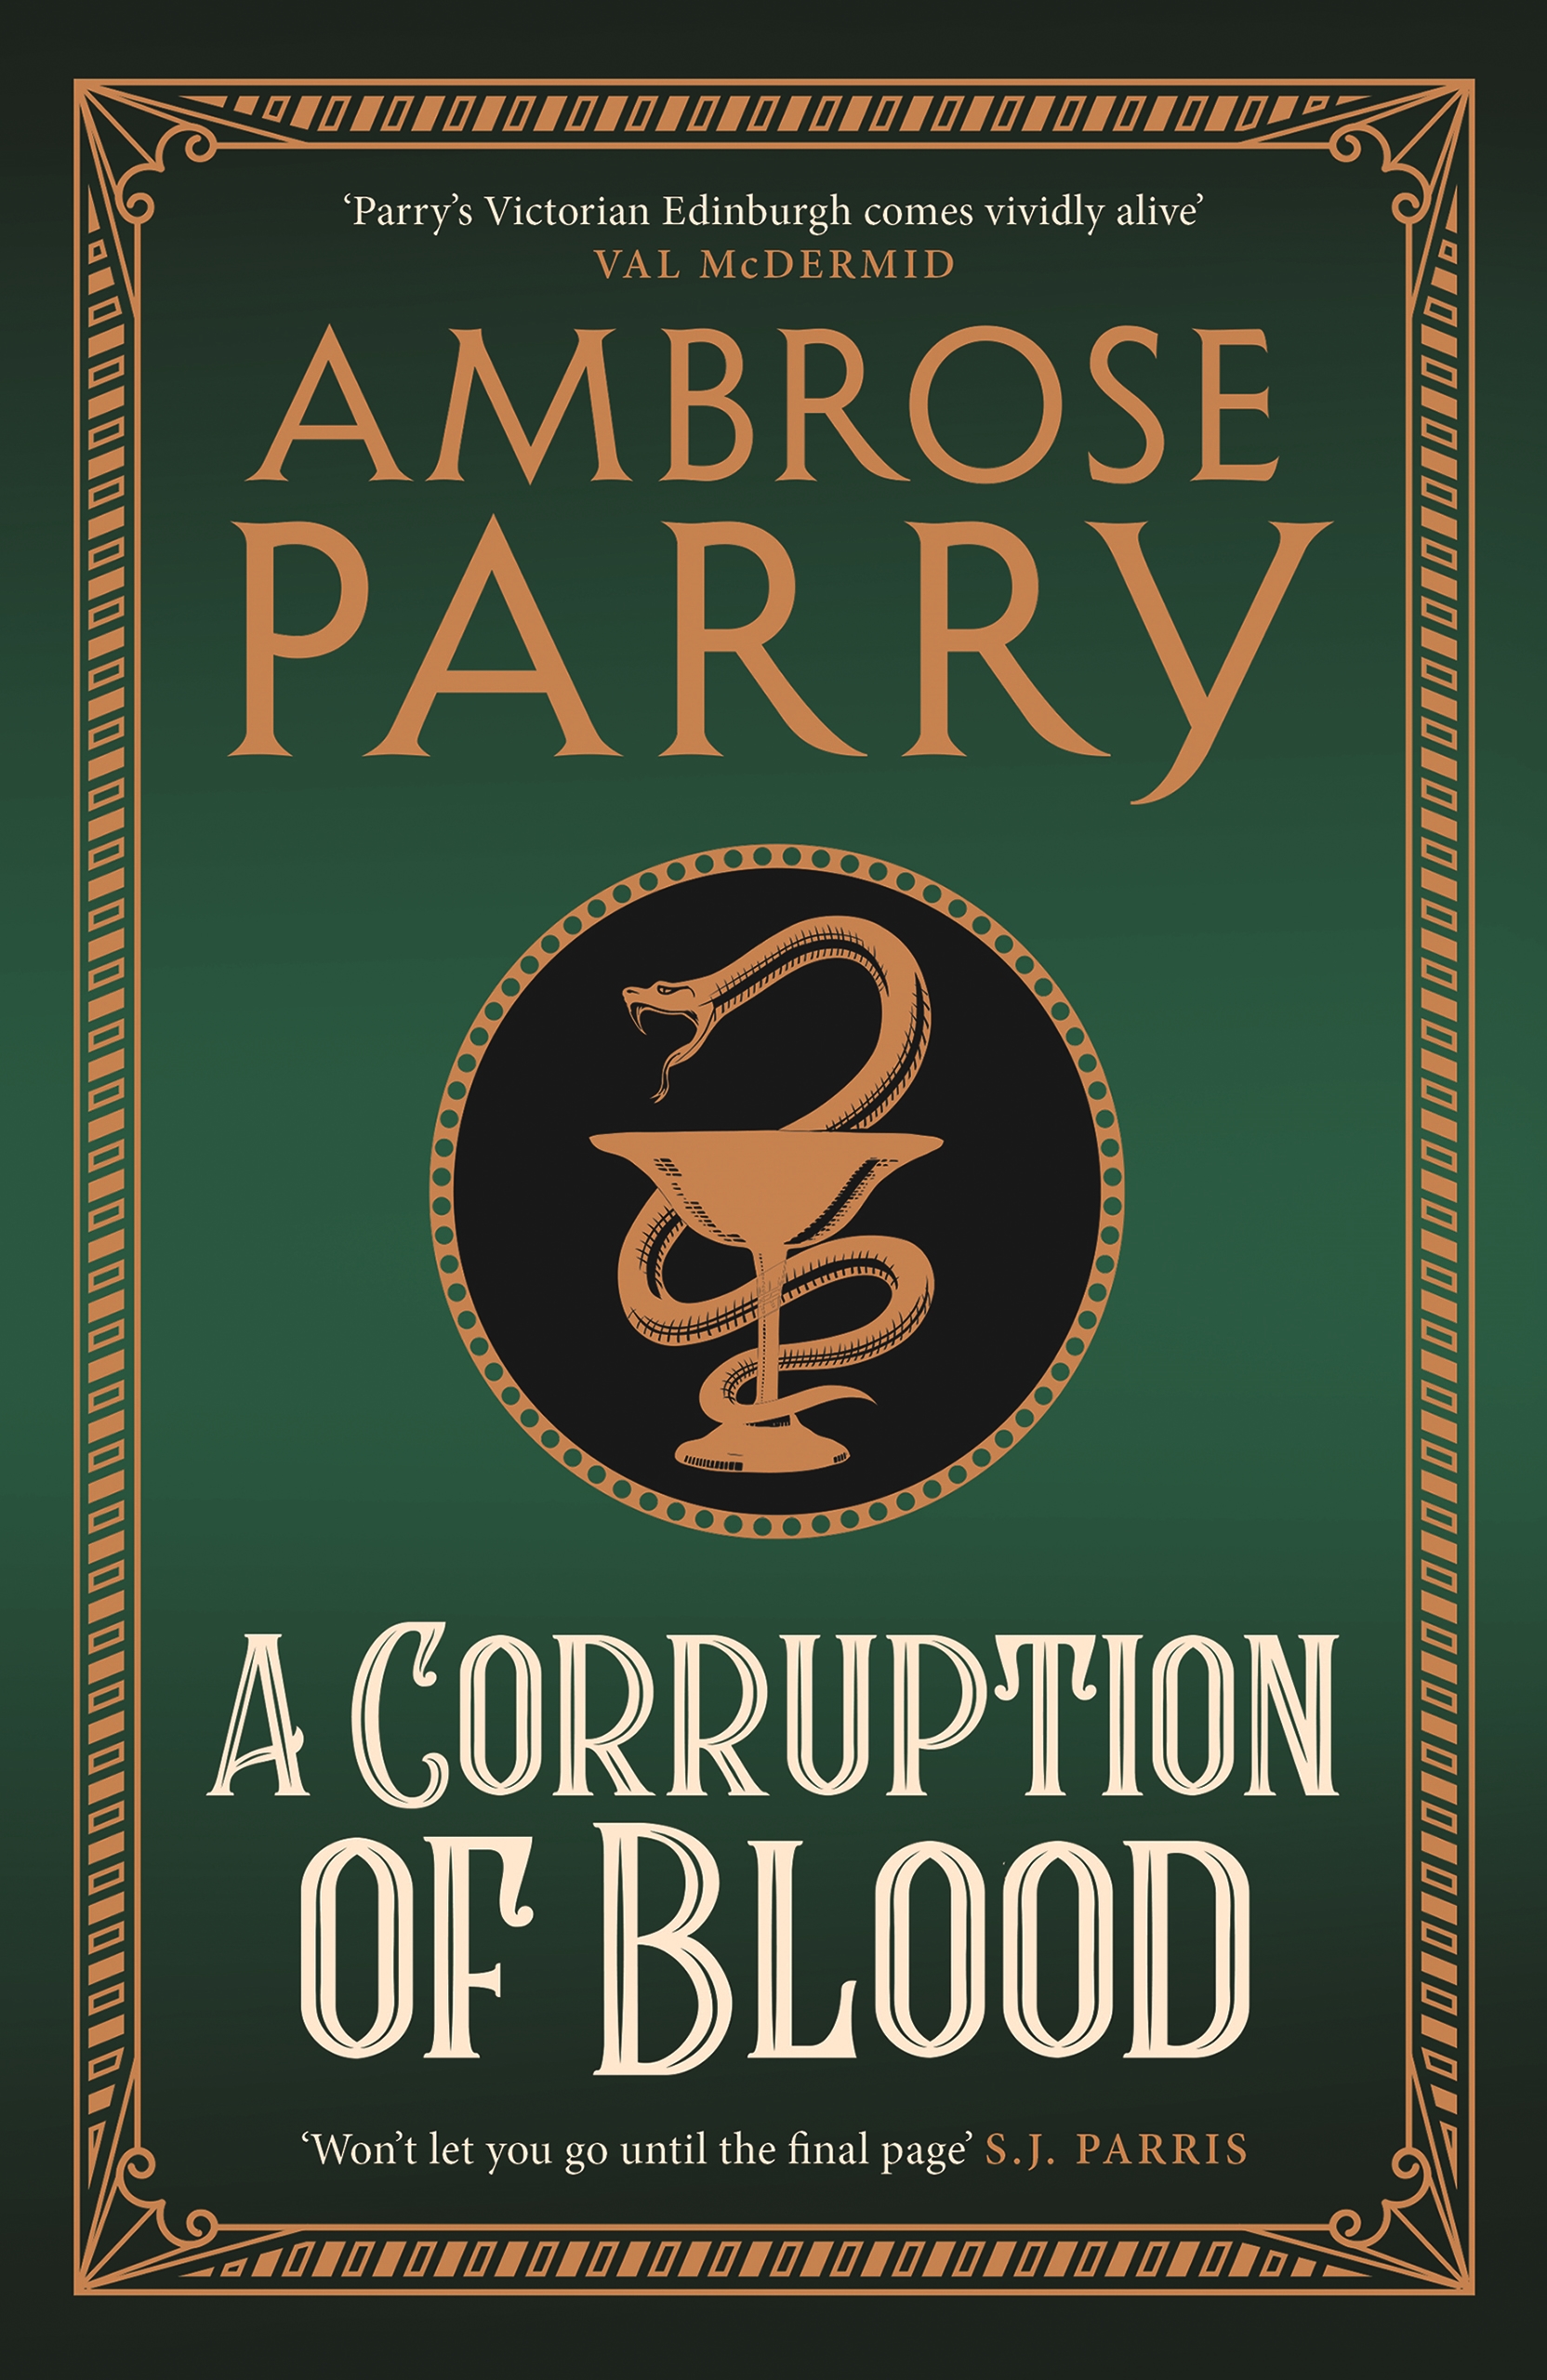 Ambrose Parry's The Corruption of Blood book cover